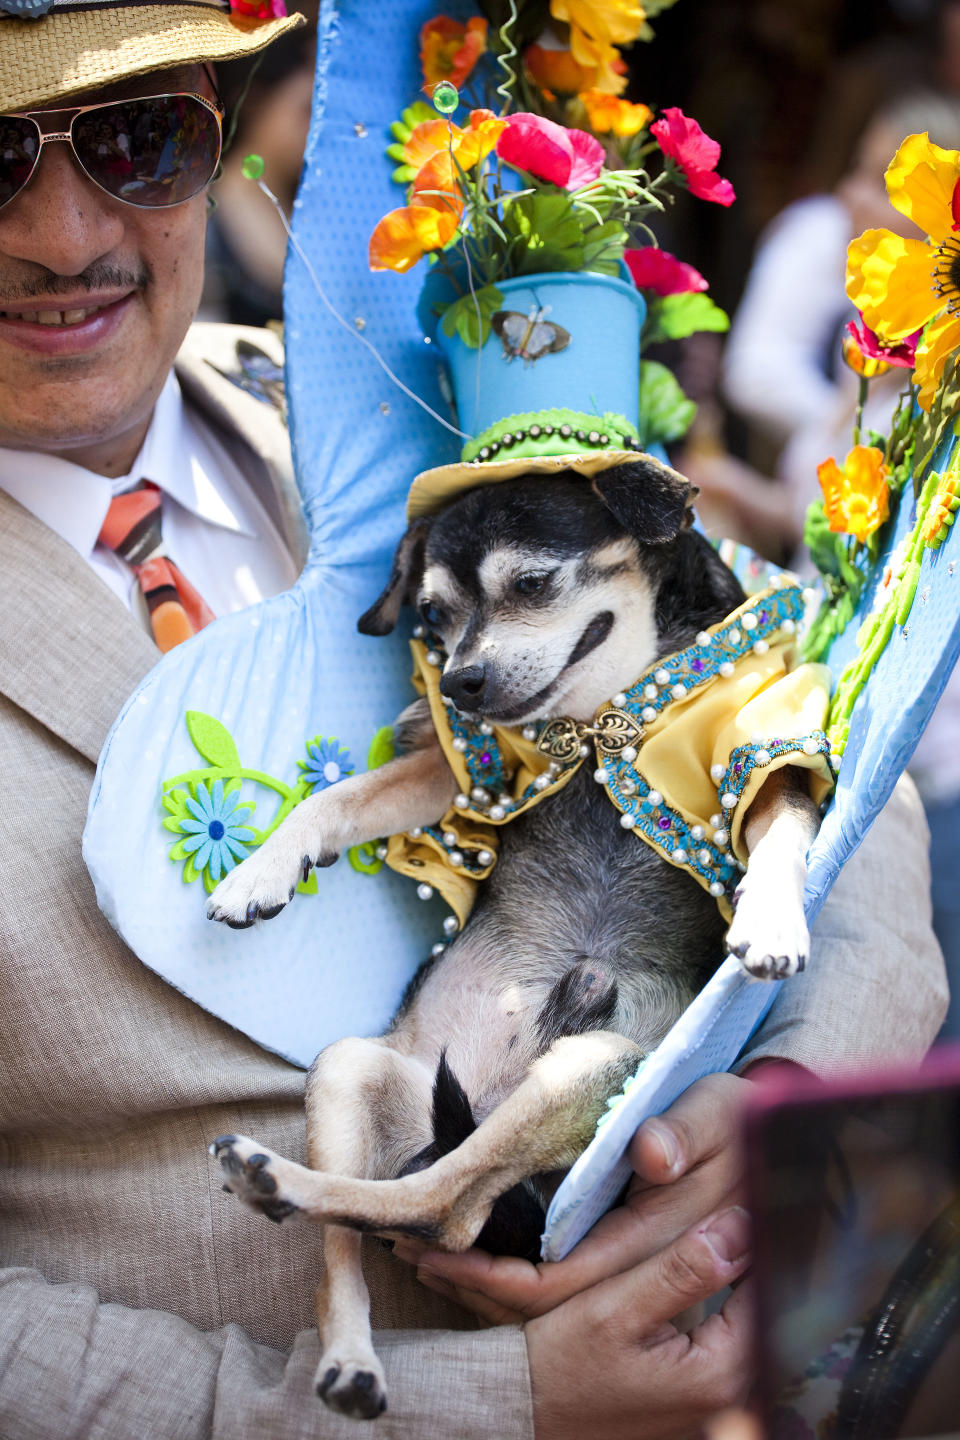 NEW YORK - APRIL 24: Anthony Rubio, of the Bronx, and his chihuahua Bandit take part in the 2011 Easter Parade and Easter Bonnet Festival on April 24, 2011 in New York City. The parade is a New York tradition dating back to the mid-1800s when the social elite would parade their new fashions down Fifth Avenue after attending Easter services in one of the Fifth Avenue churches. (Photo by Michael Nagle/Getty Images)